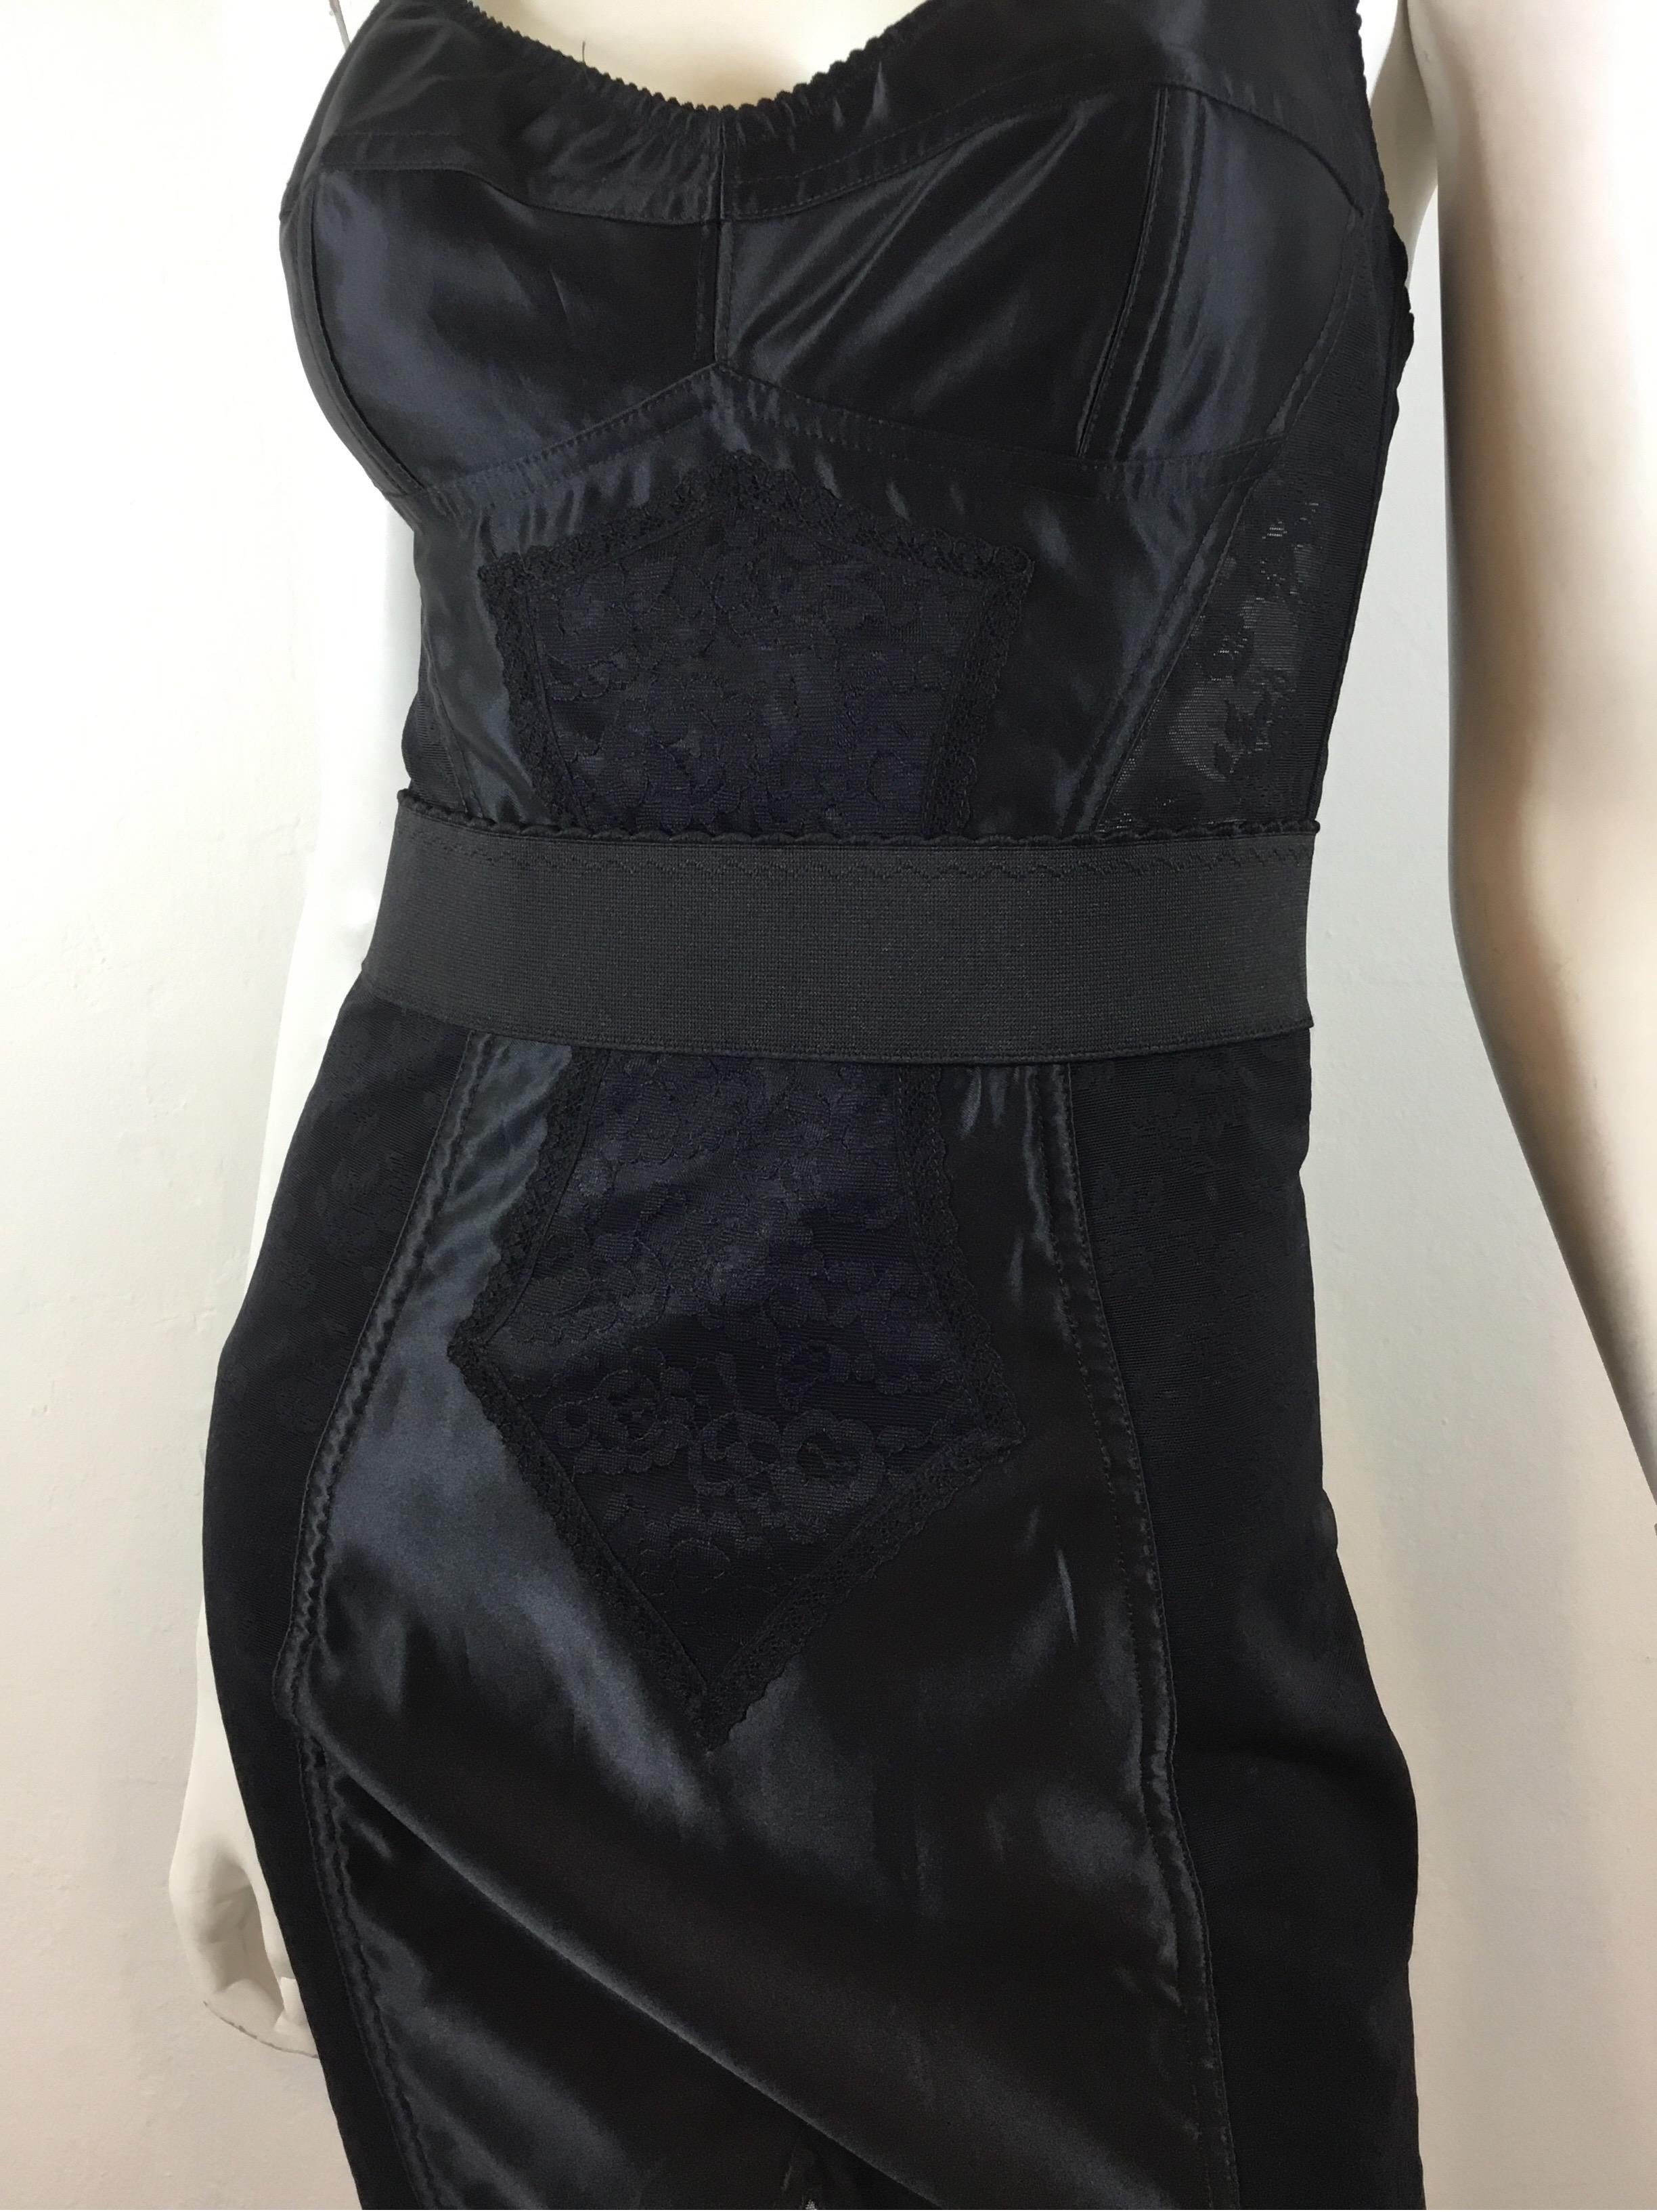 Dolce & Gabbana 2017 Lace & Satin Corset Dress In Excellent Condition In Carmel, CA